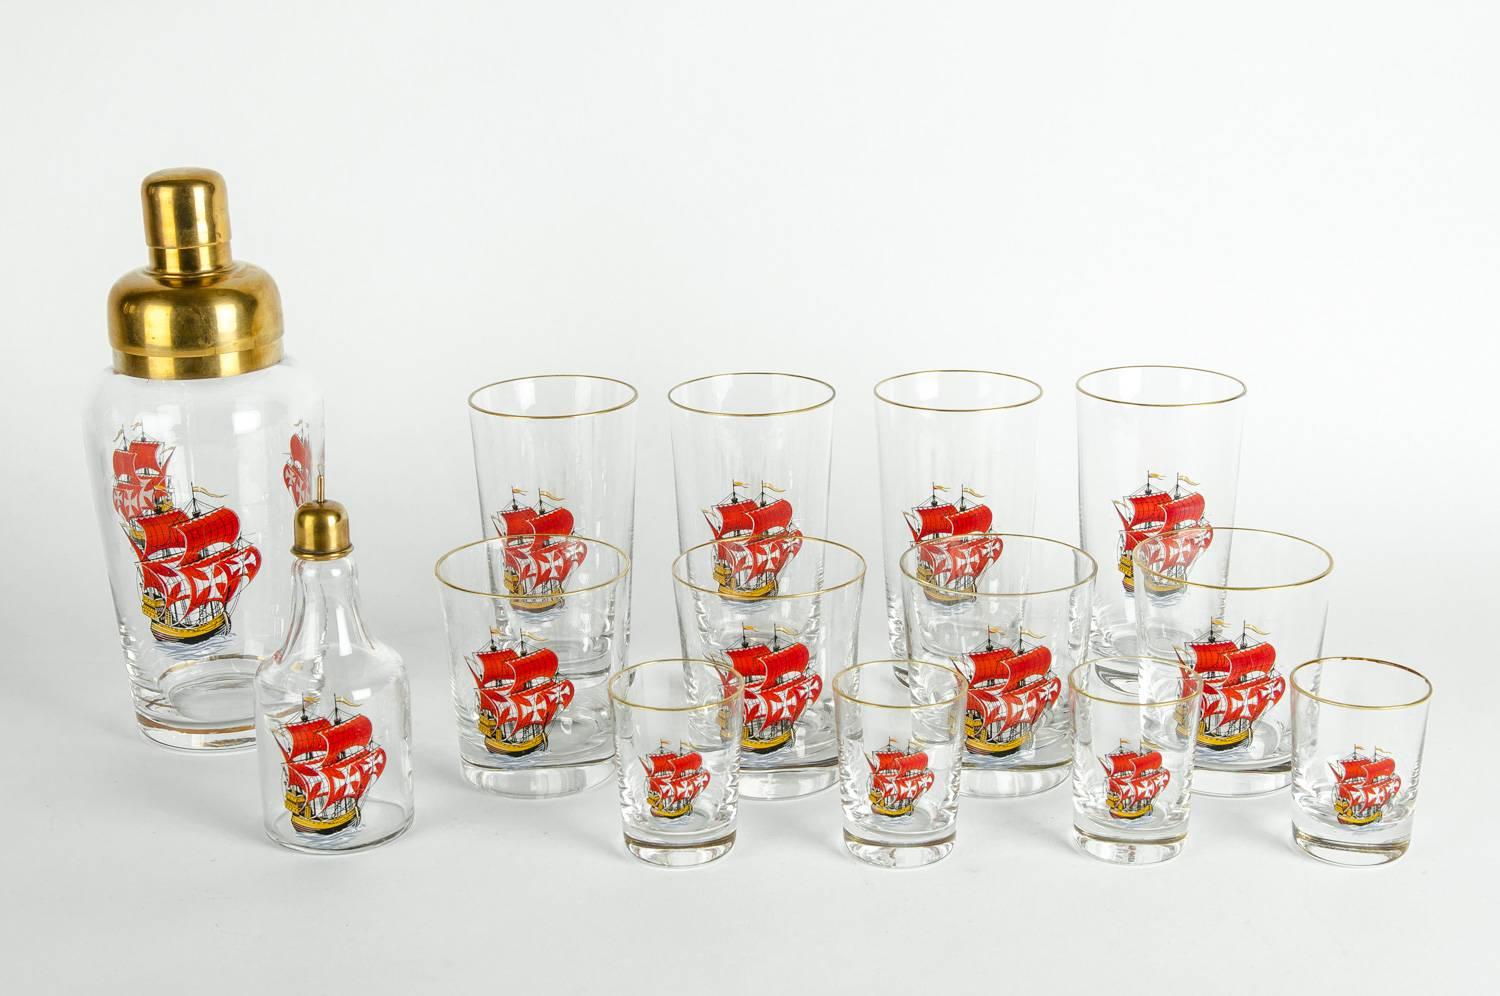 Beautiful vintage barware 14 pieces cocktail shaker set with red sailing boat design details and gold trimmed top. Each piece is in excellent condition. The cocktail shaker measure 9 inches high x 4 inches body diameter. The syrup bottle measure